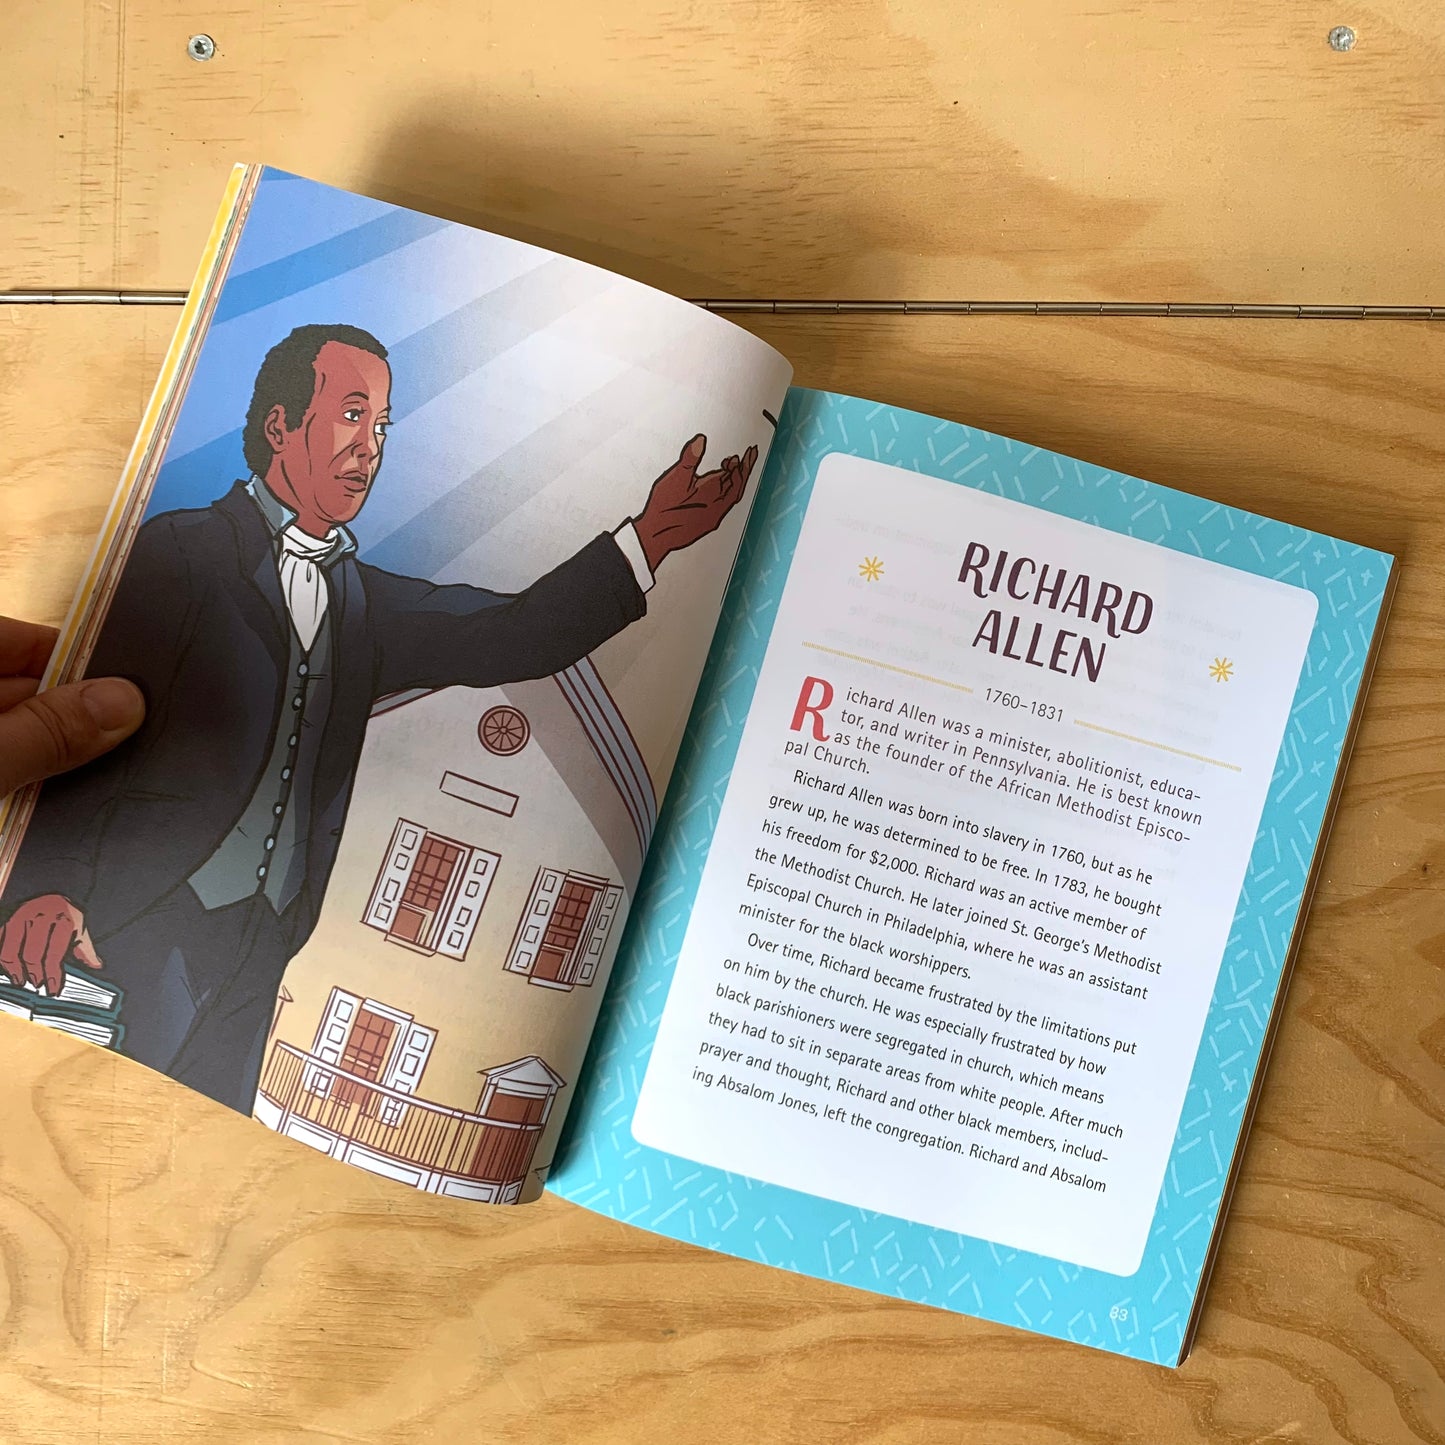 Black Heroes. A Black History Book for Kids: 51 Inspiring People from Ancient Africa to Modern-Day U.S.A. – Arlisha Norwood